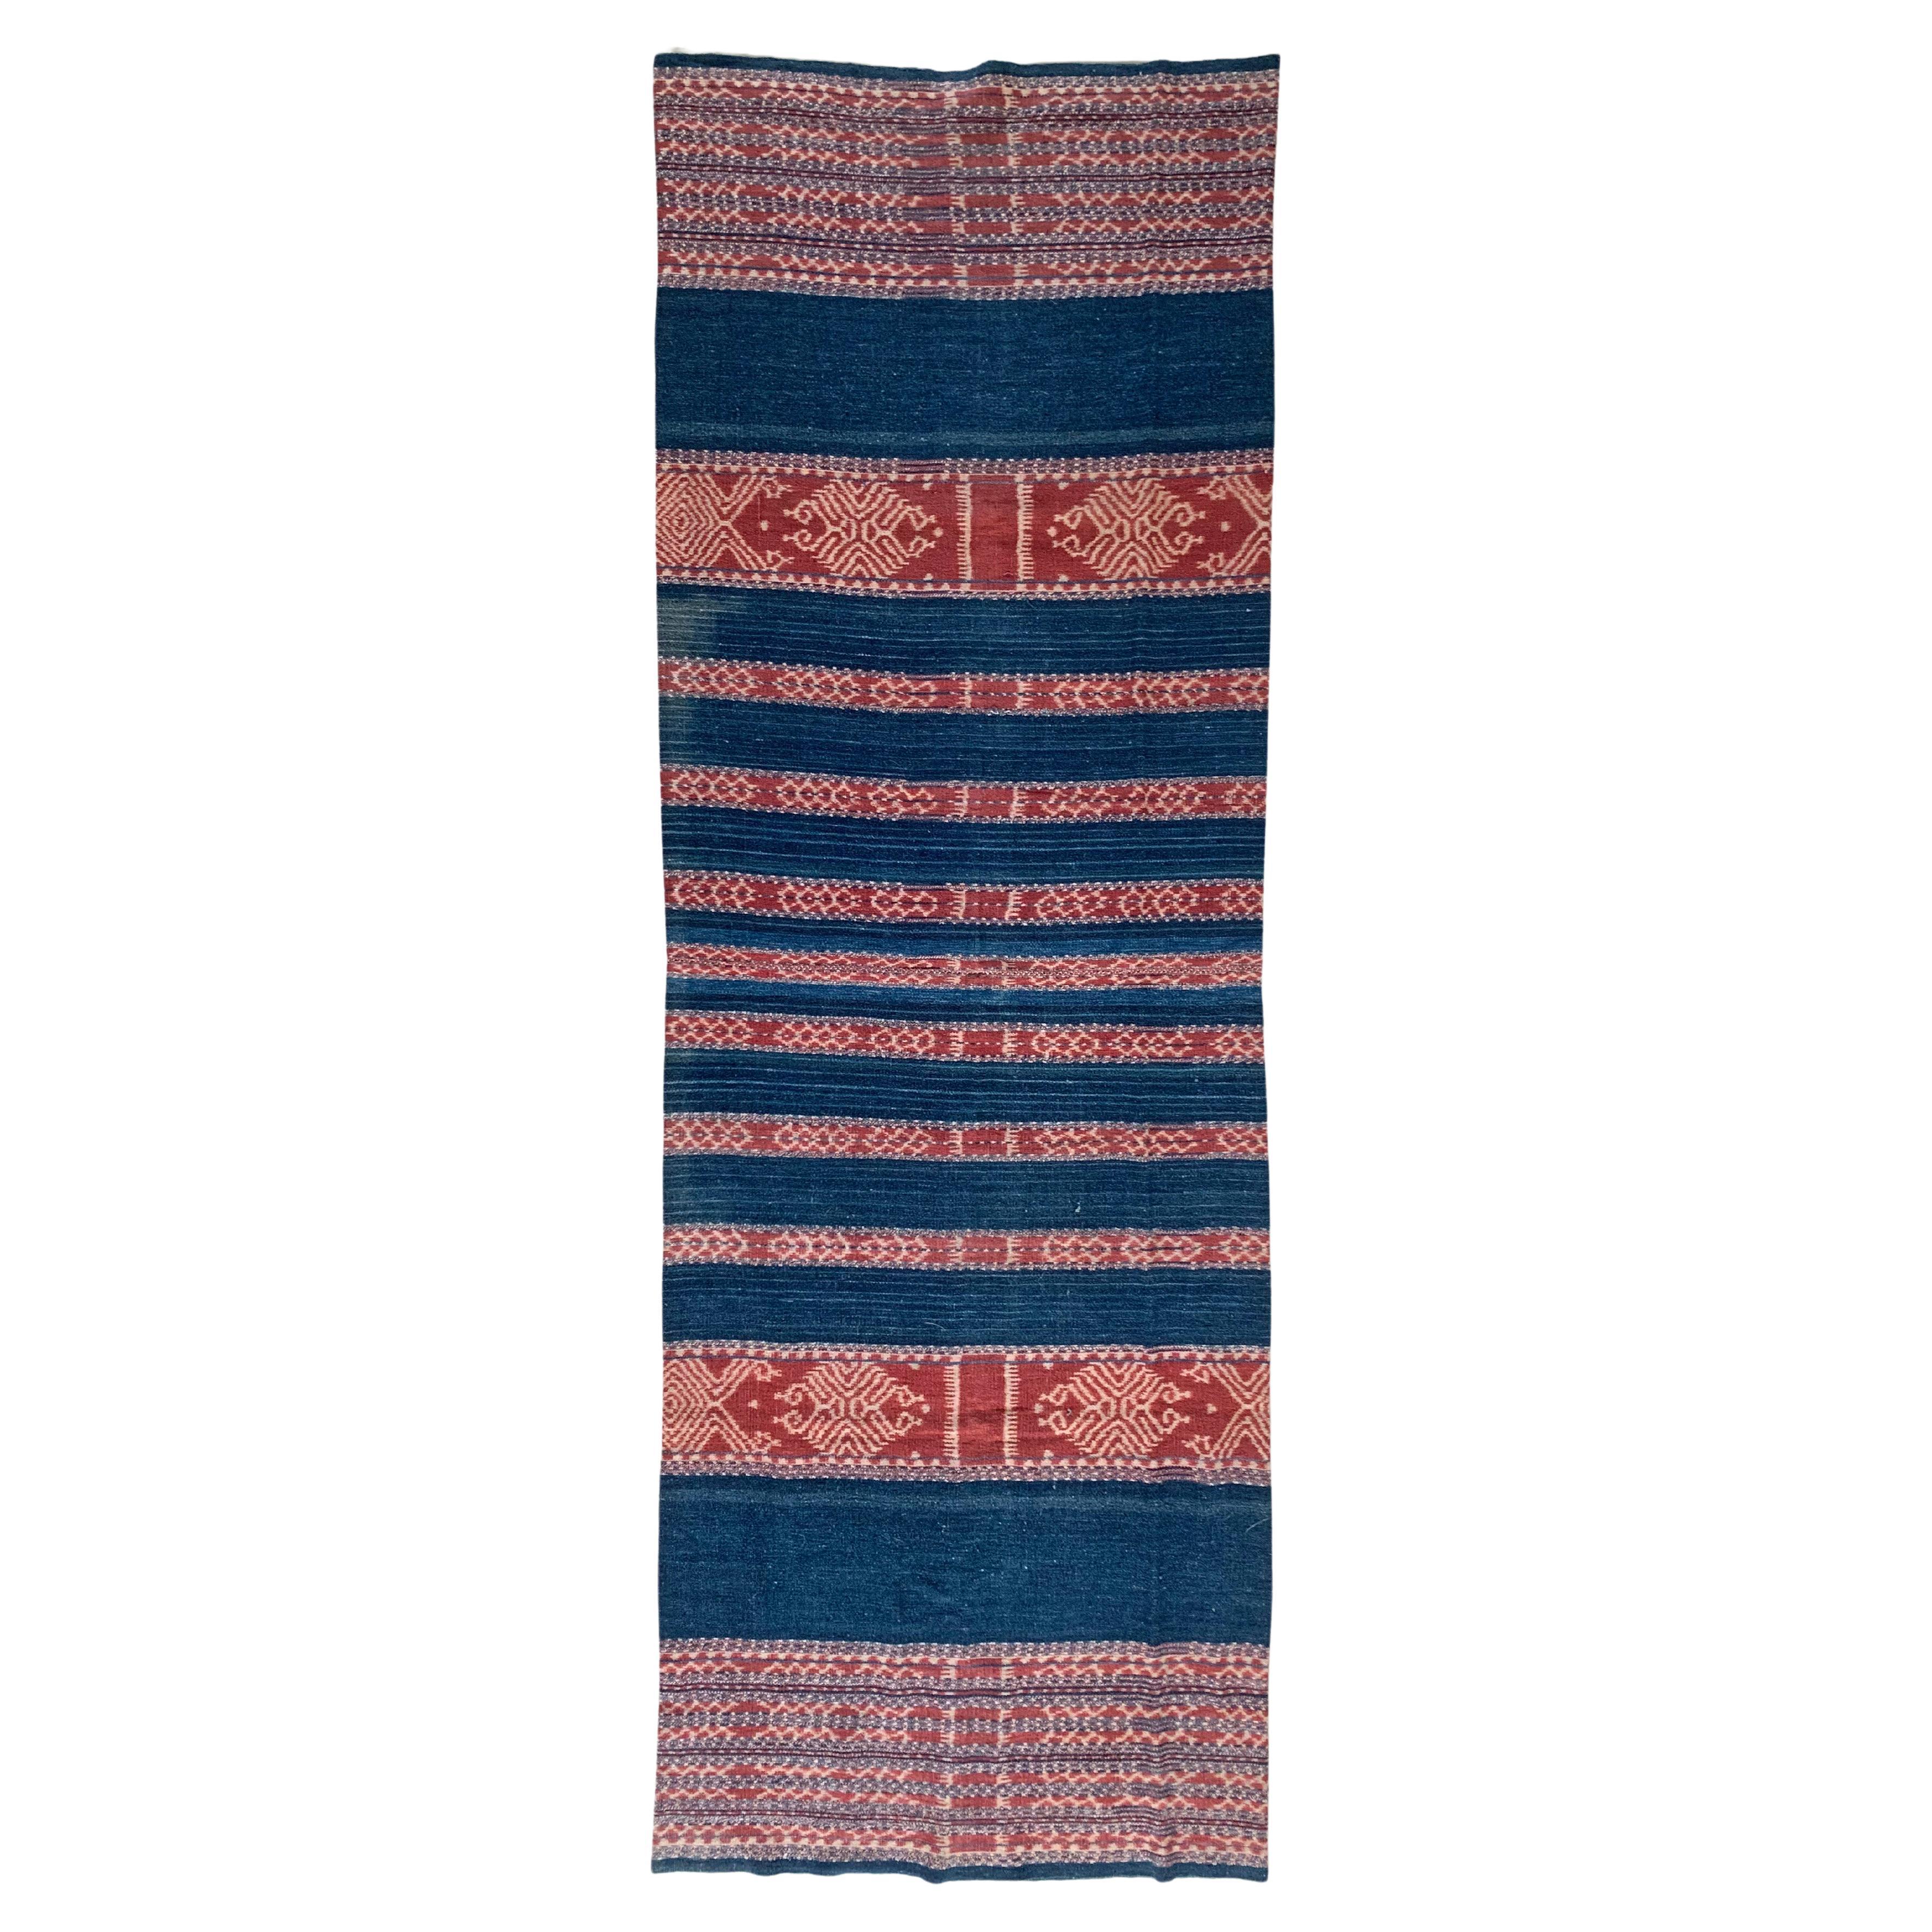 Ikat Textile from Timor with Naturally Coloured Dye & Tribal Motifs, Indonesia For Sale